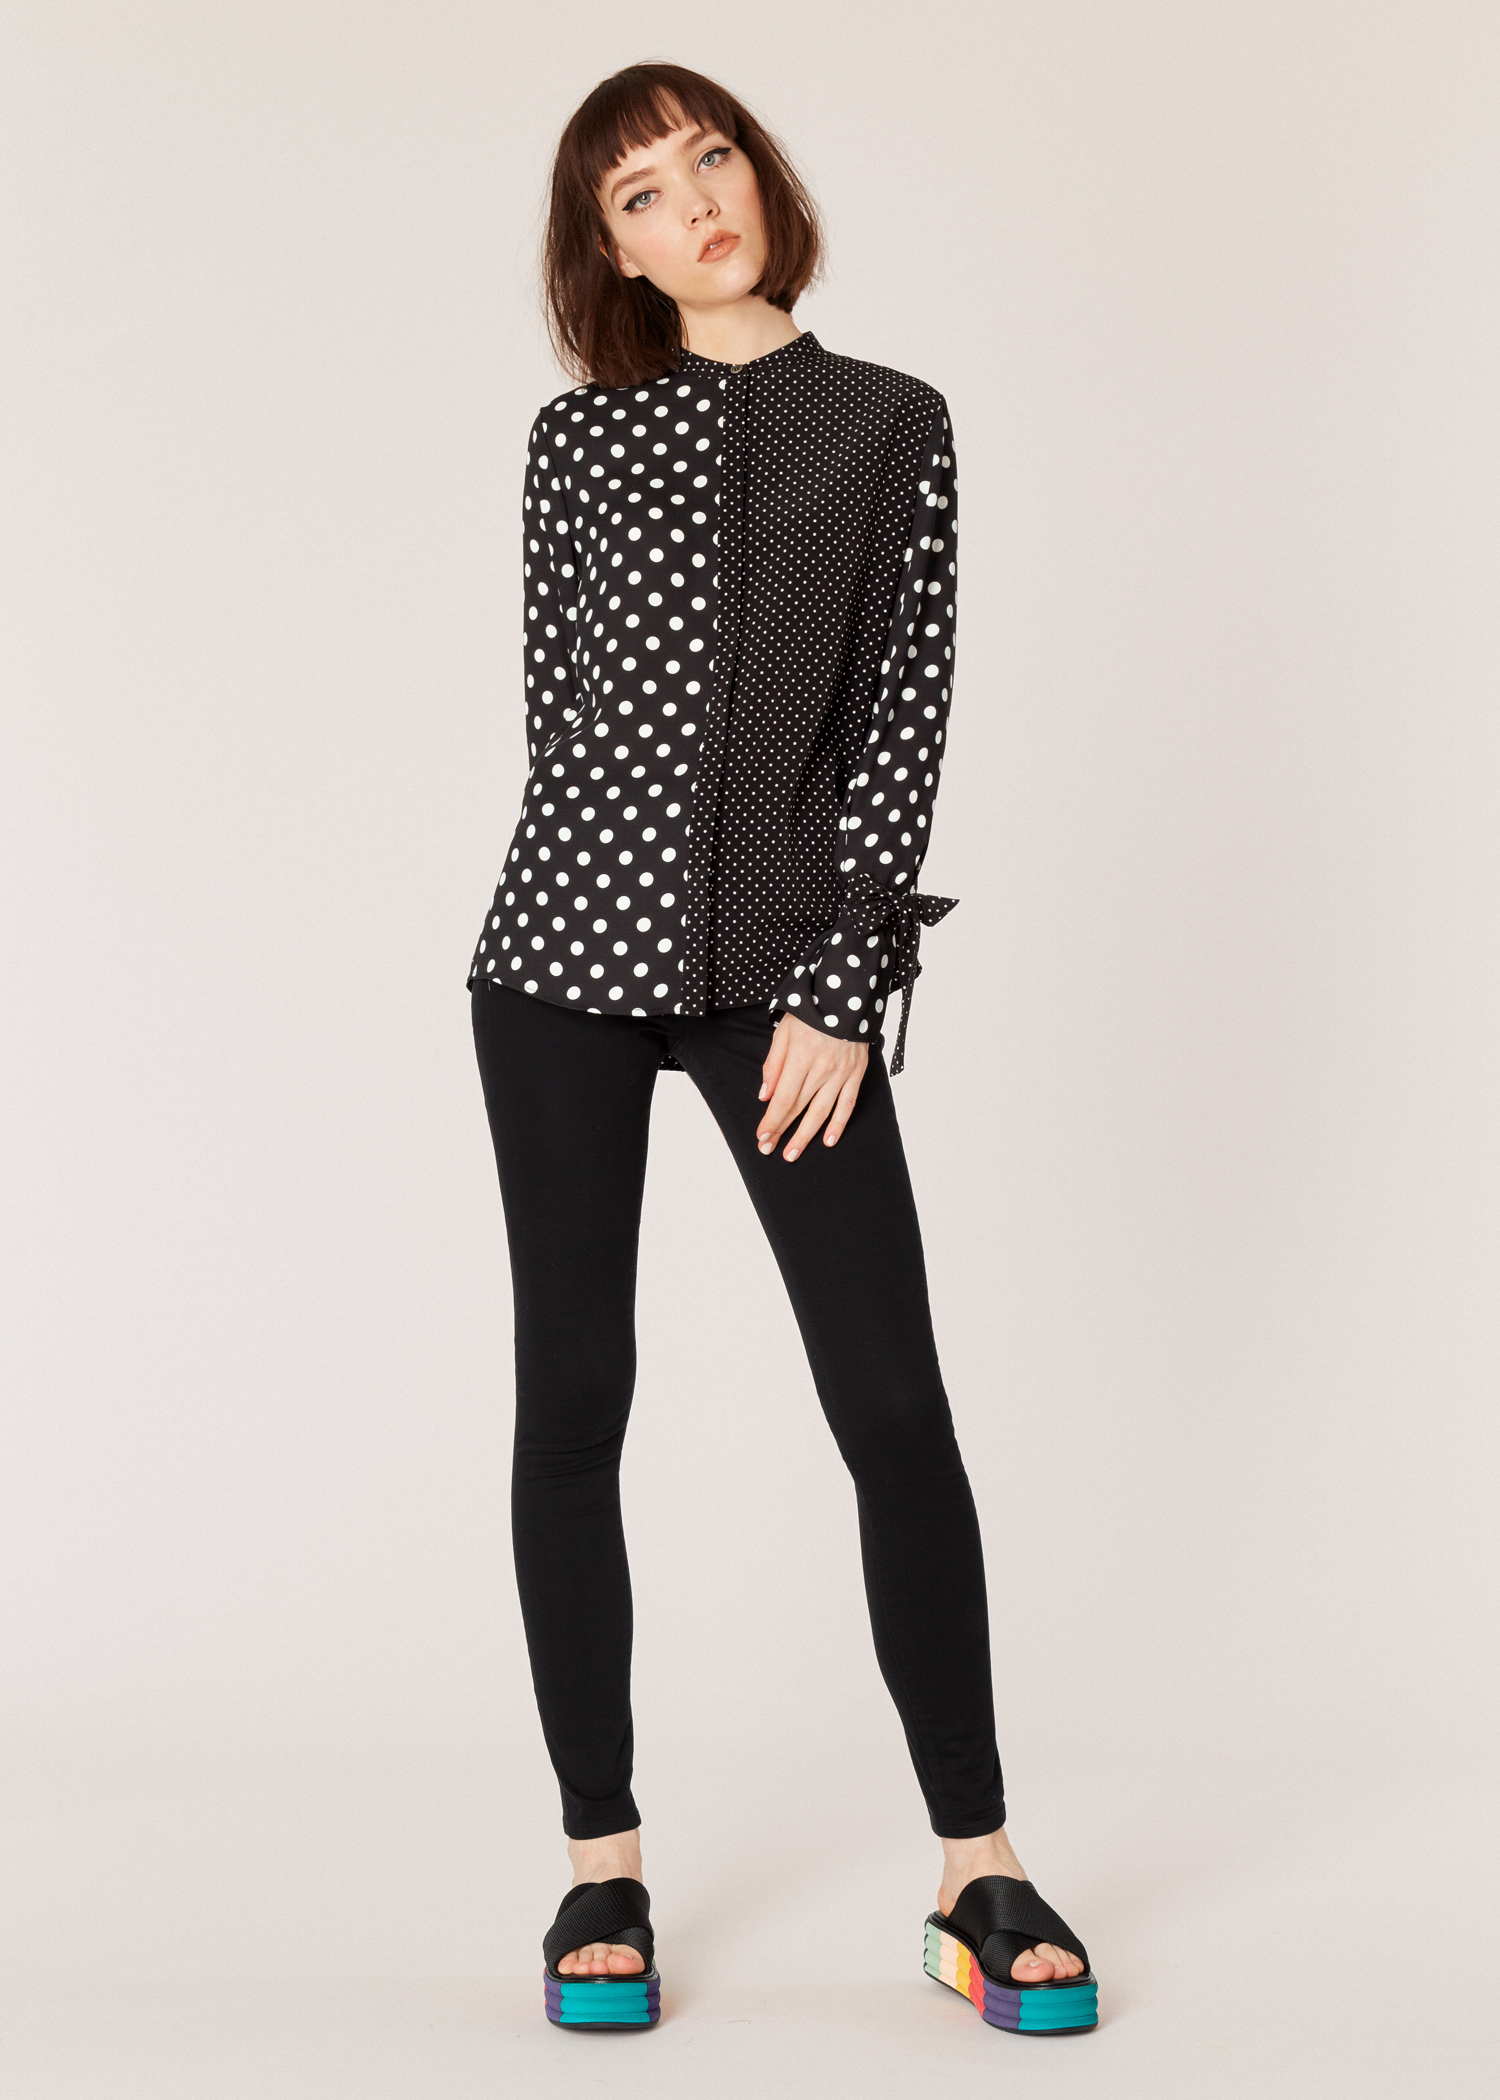 Women's Black And White Polka Dot Shirt With Tie Cuffs - Paul Smith US